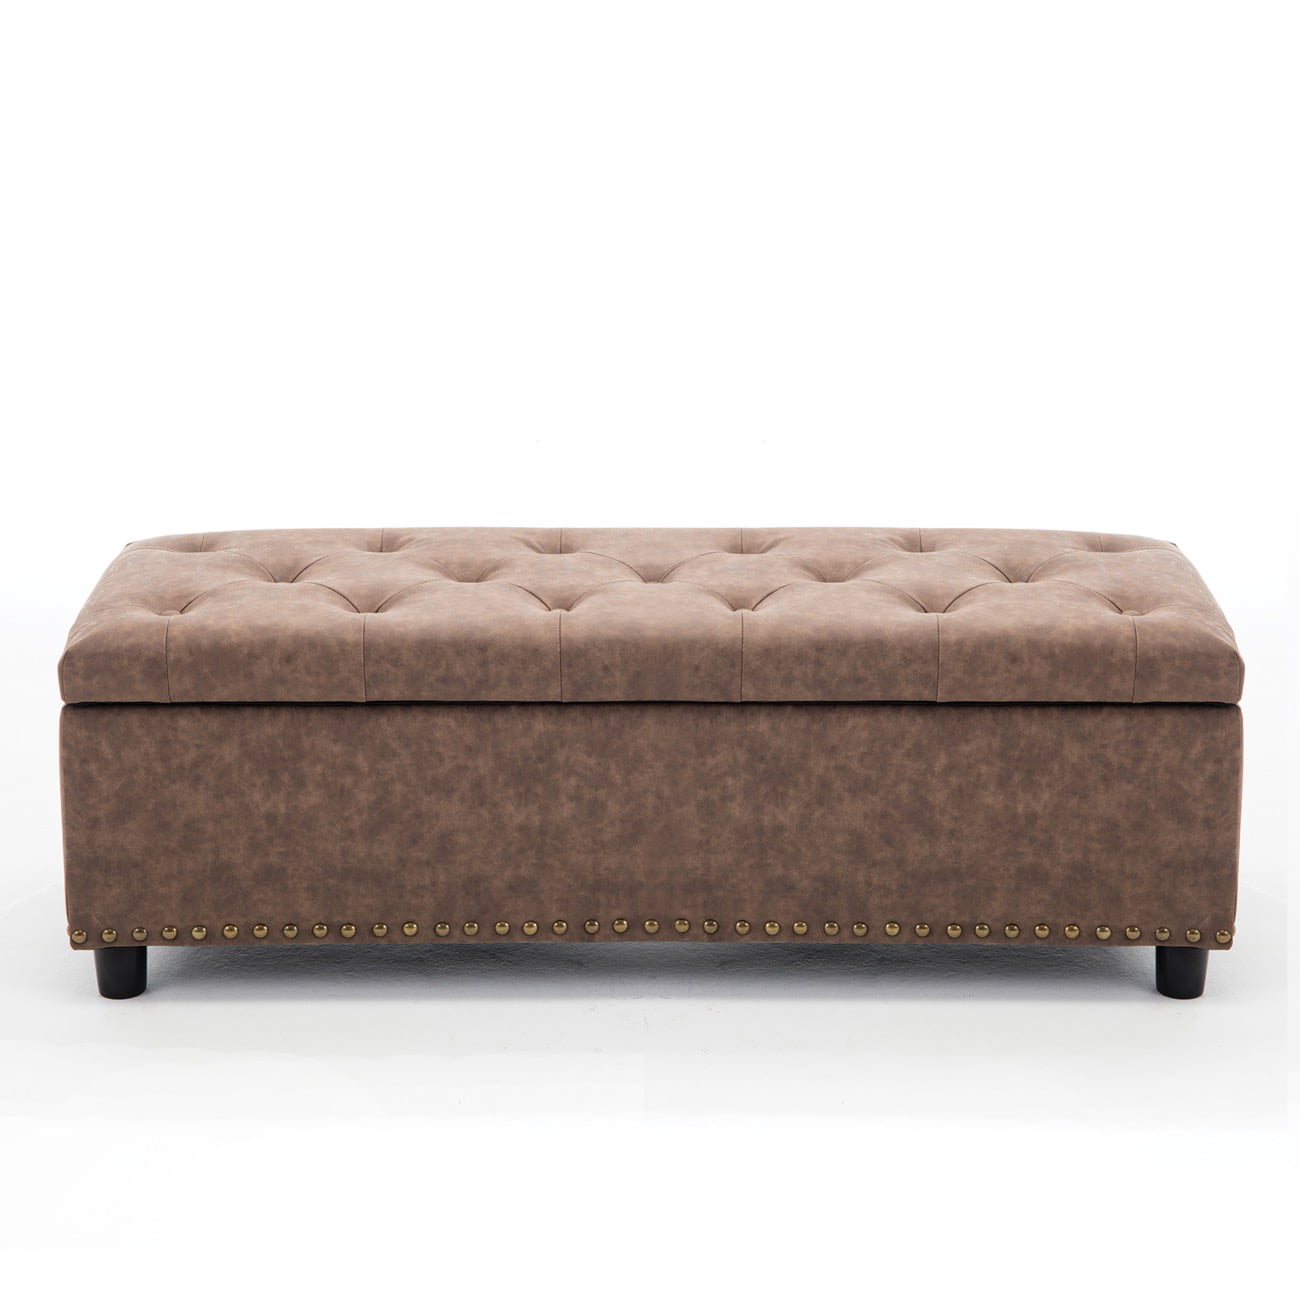 Belleze 48 Upholstered Faux Leather, Leather Storage Ottoman Bench Tufted